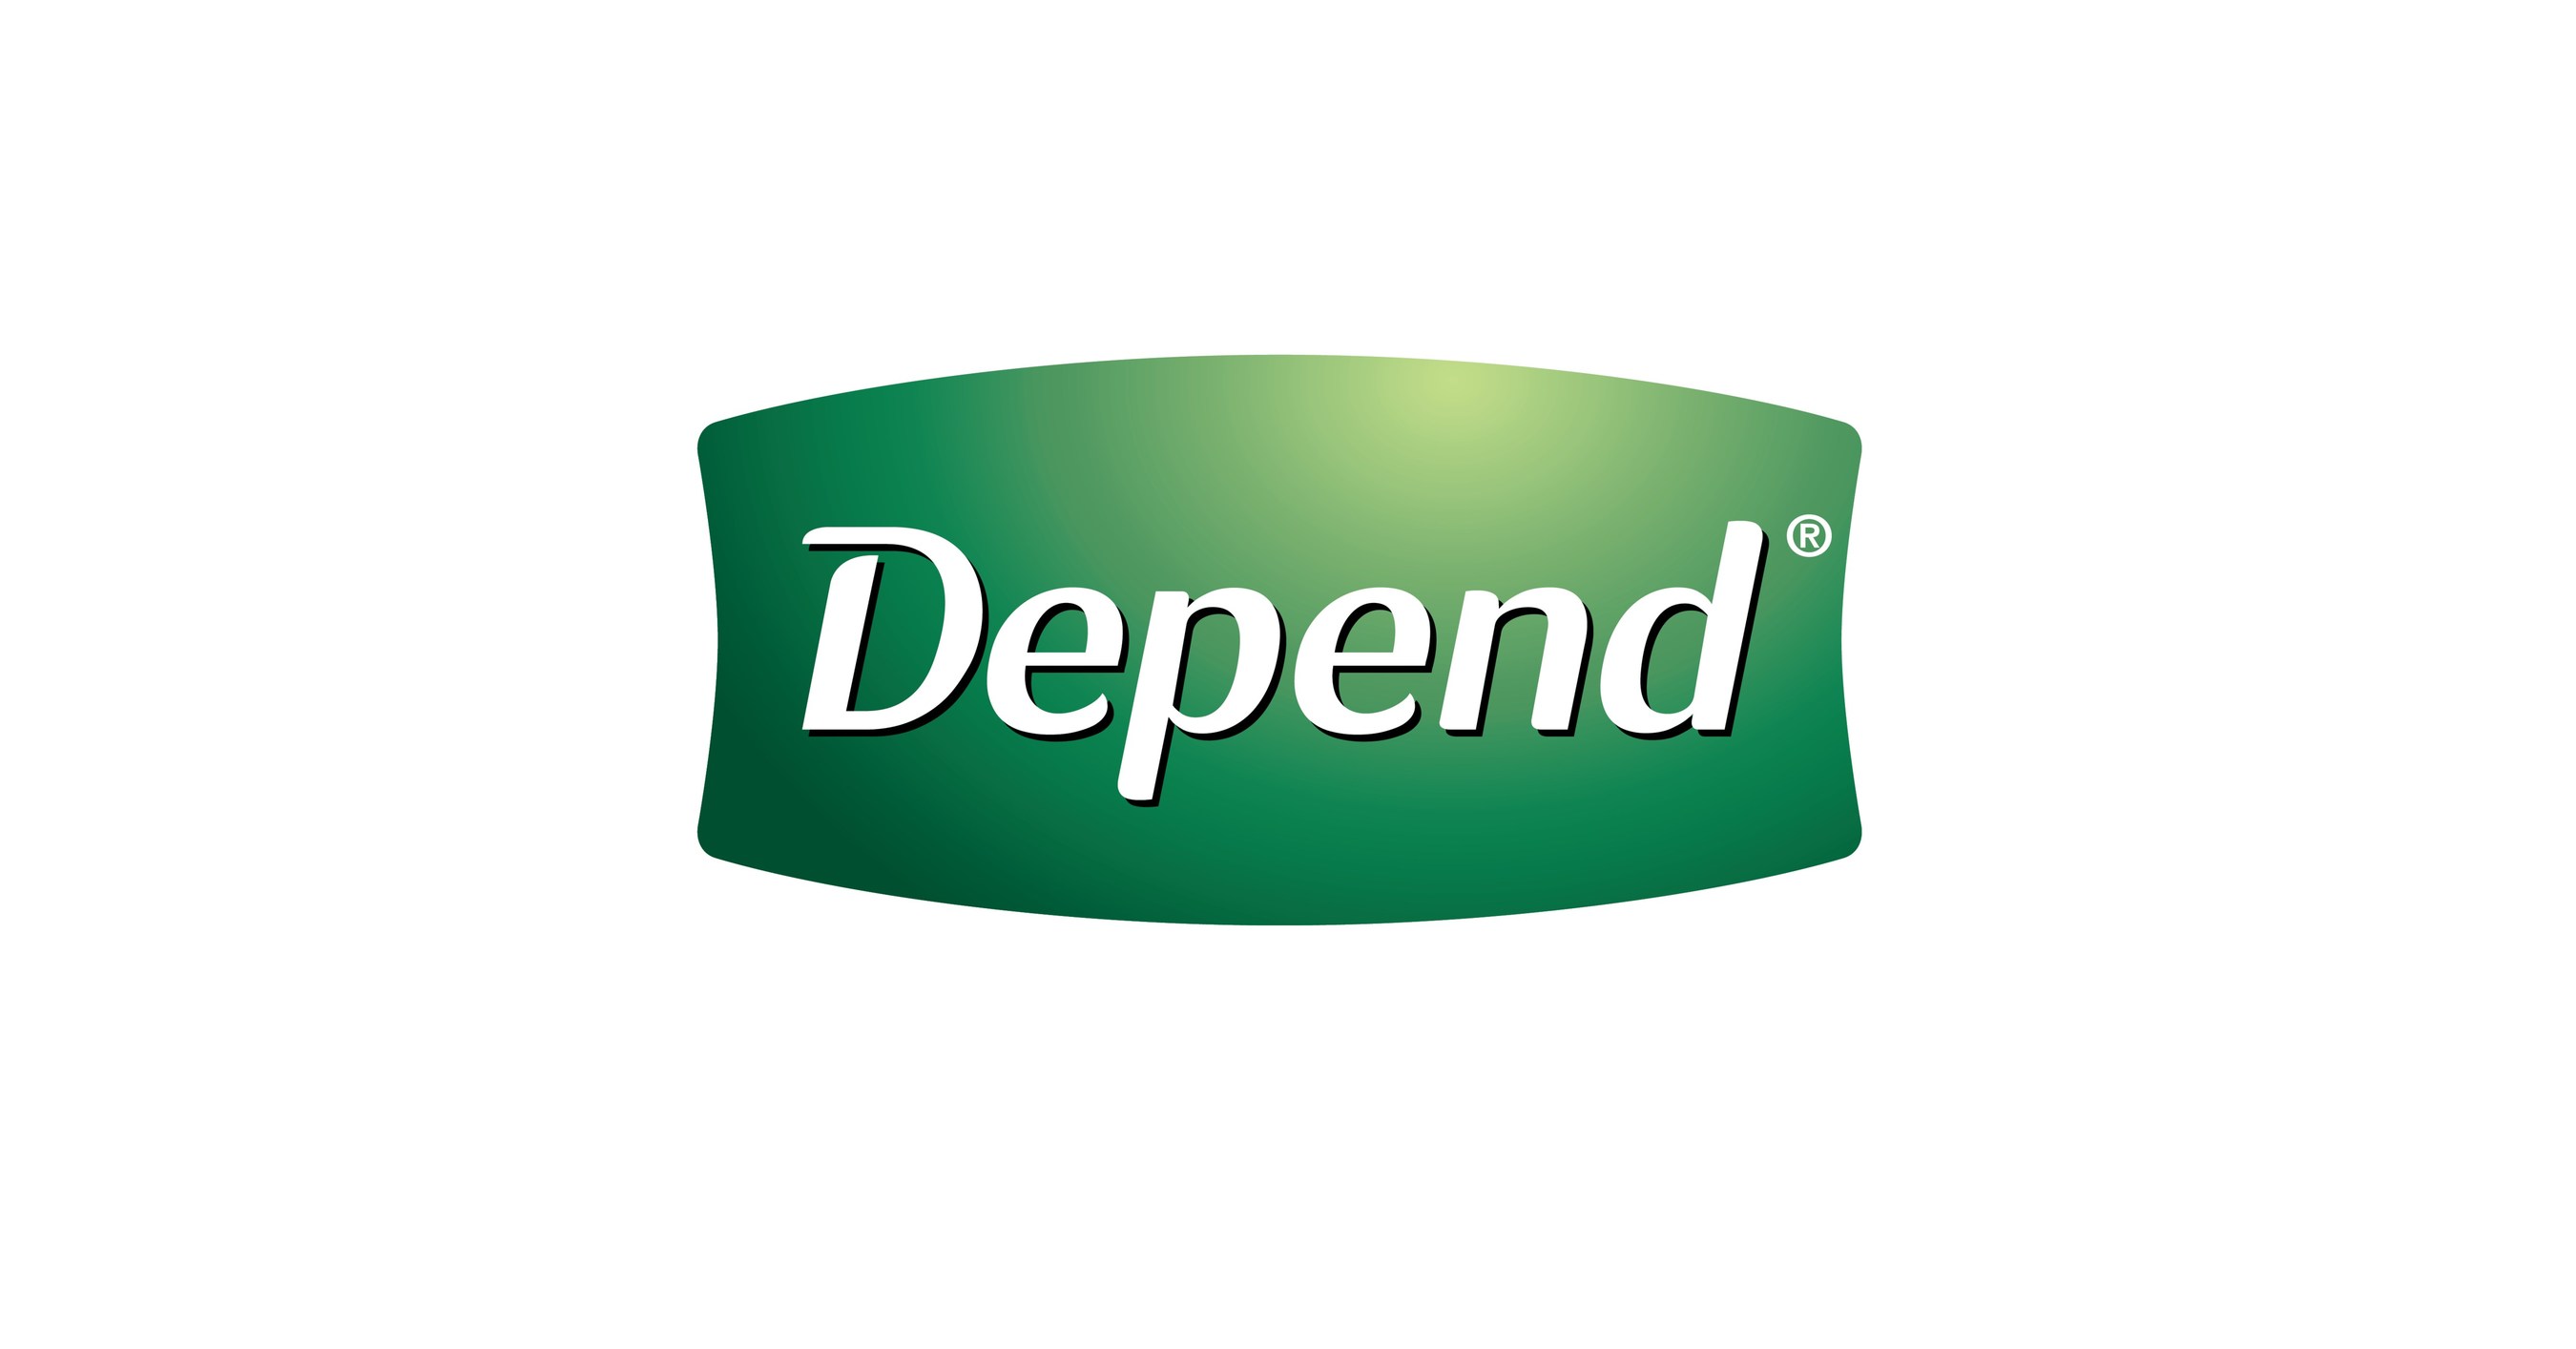 Depend Silhouette Classic Incontinence Underwear for Women